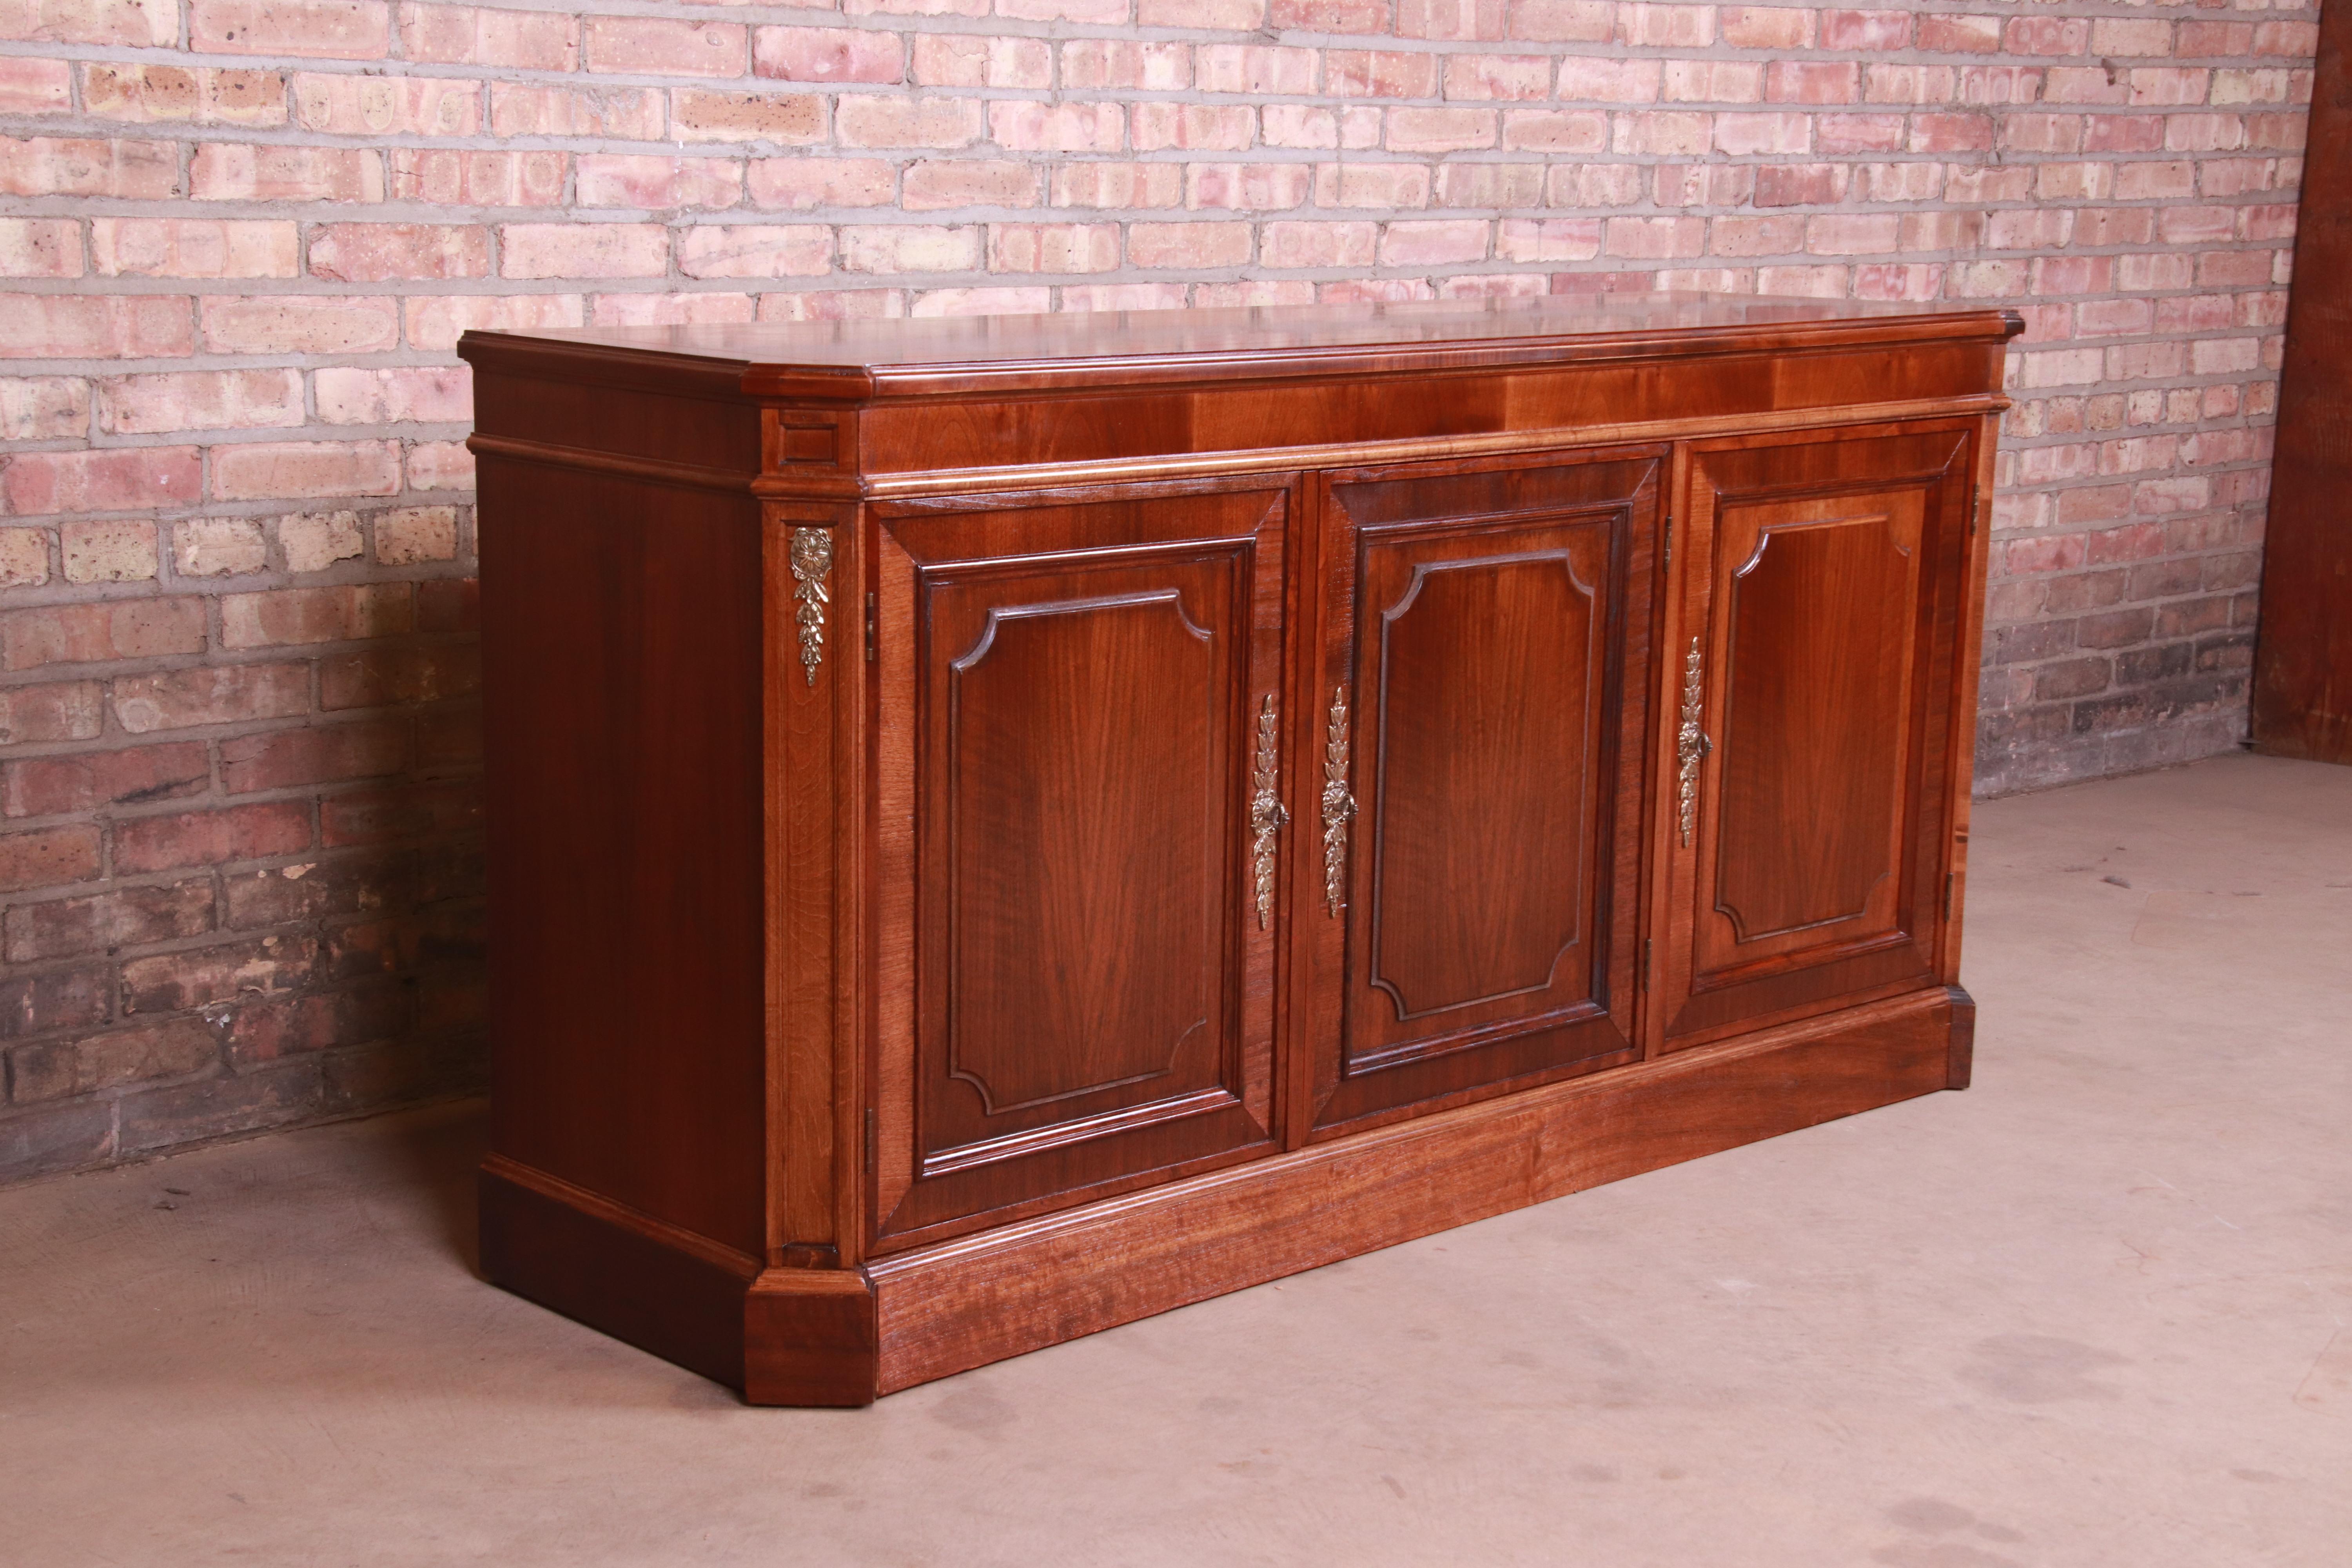 20th Century Baker Furniture French Regency Mahogany Sideboard or Bar Cabinet, Refinished